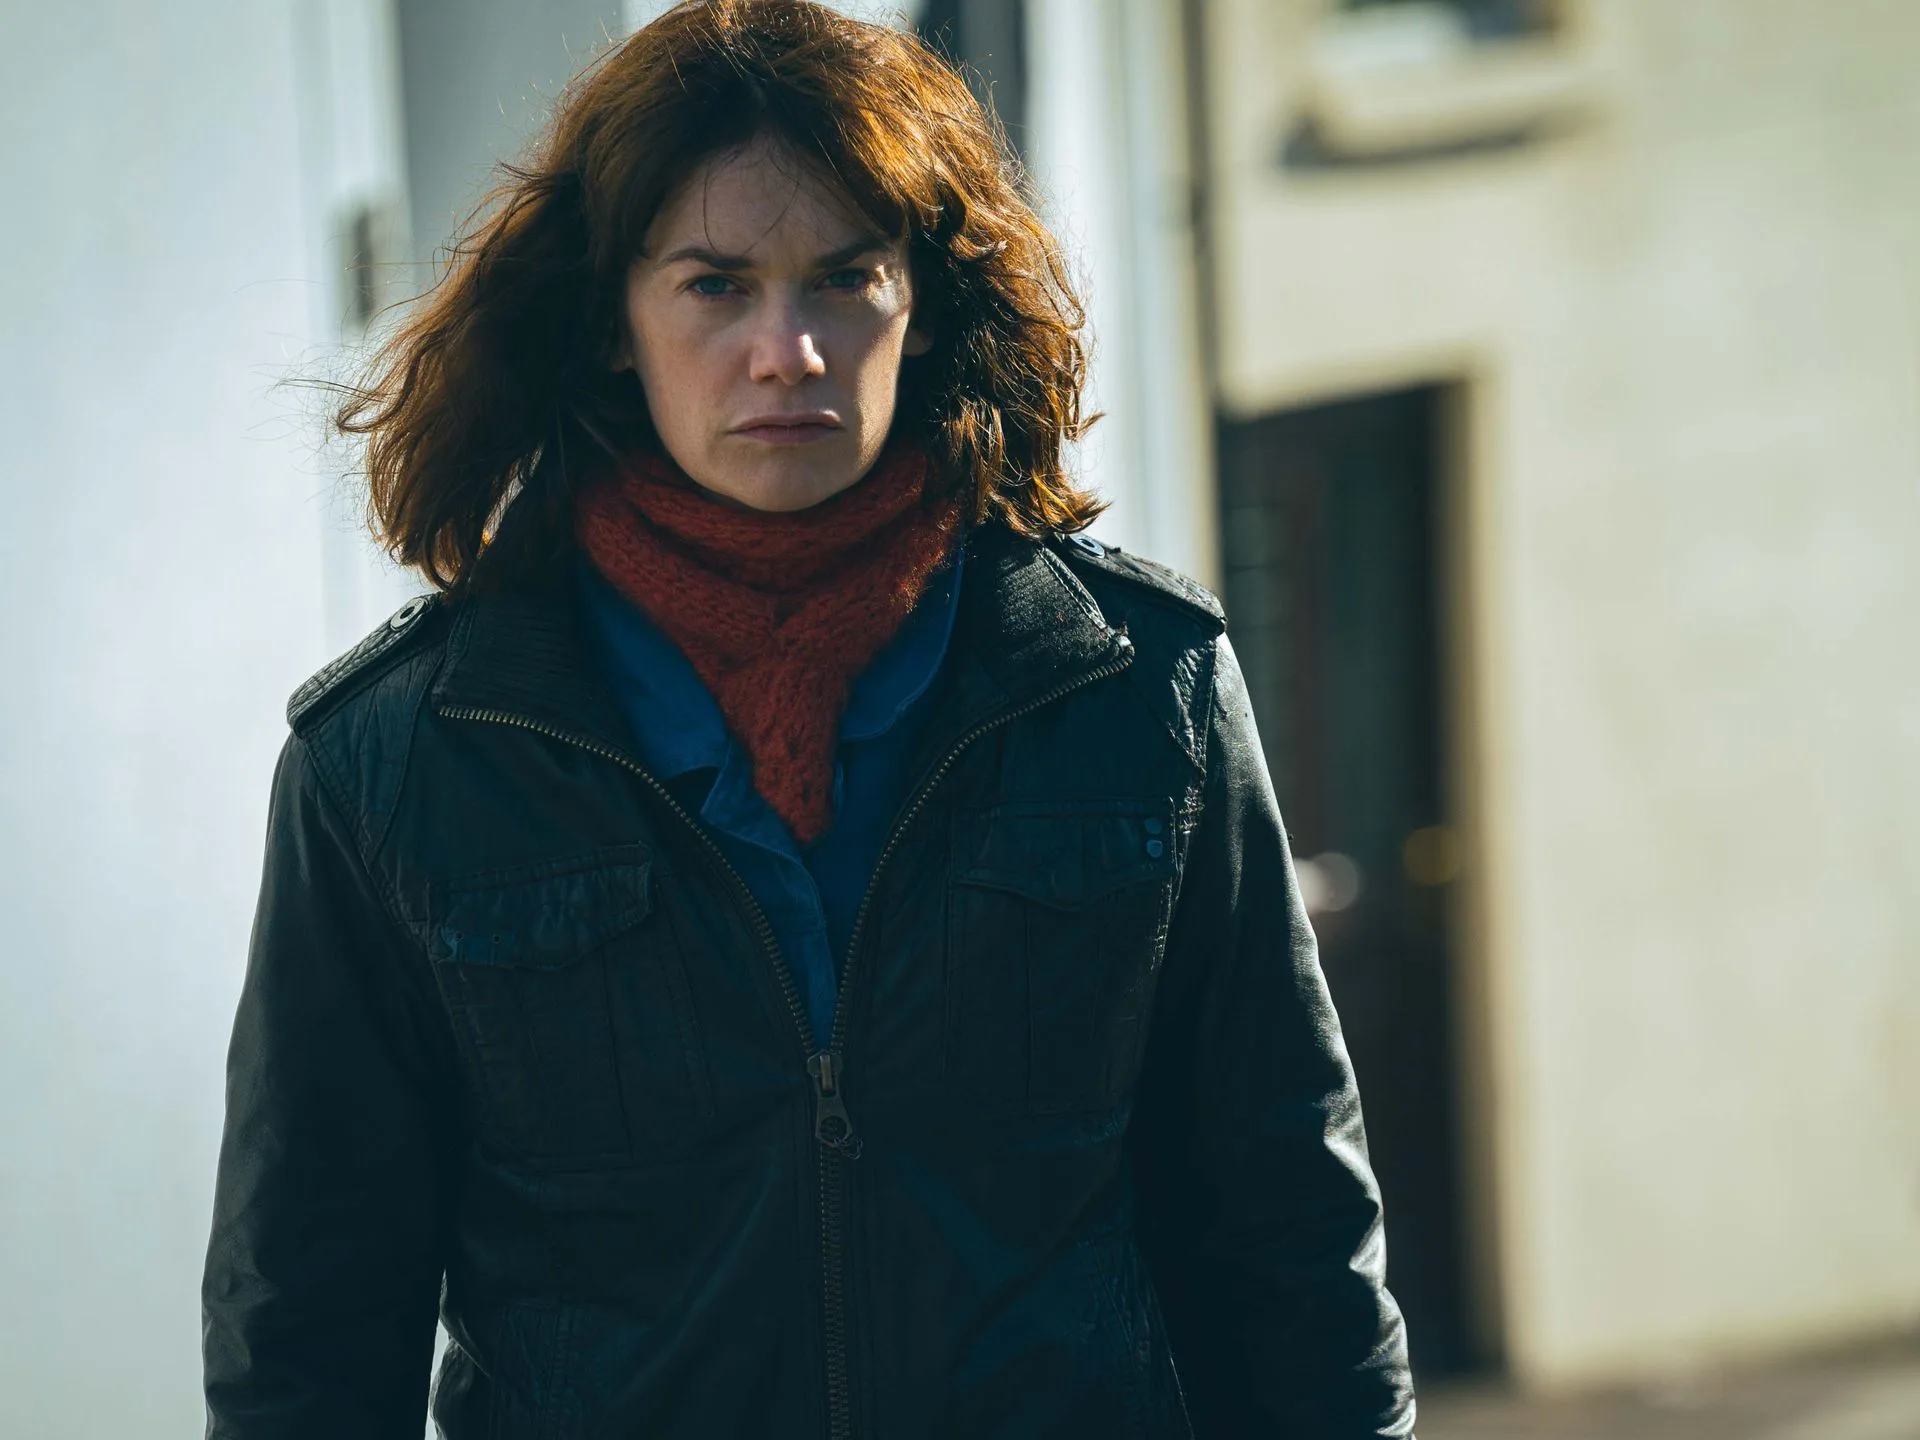 "BBC's 'The Woman in the Wall': Ruth Wilson's Deep Dive into Ireland's Dark Secrets"